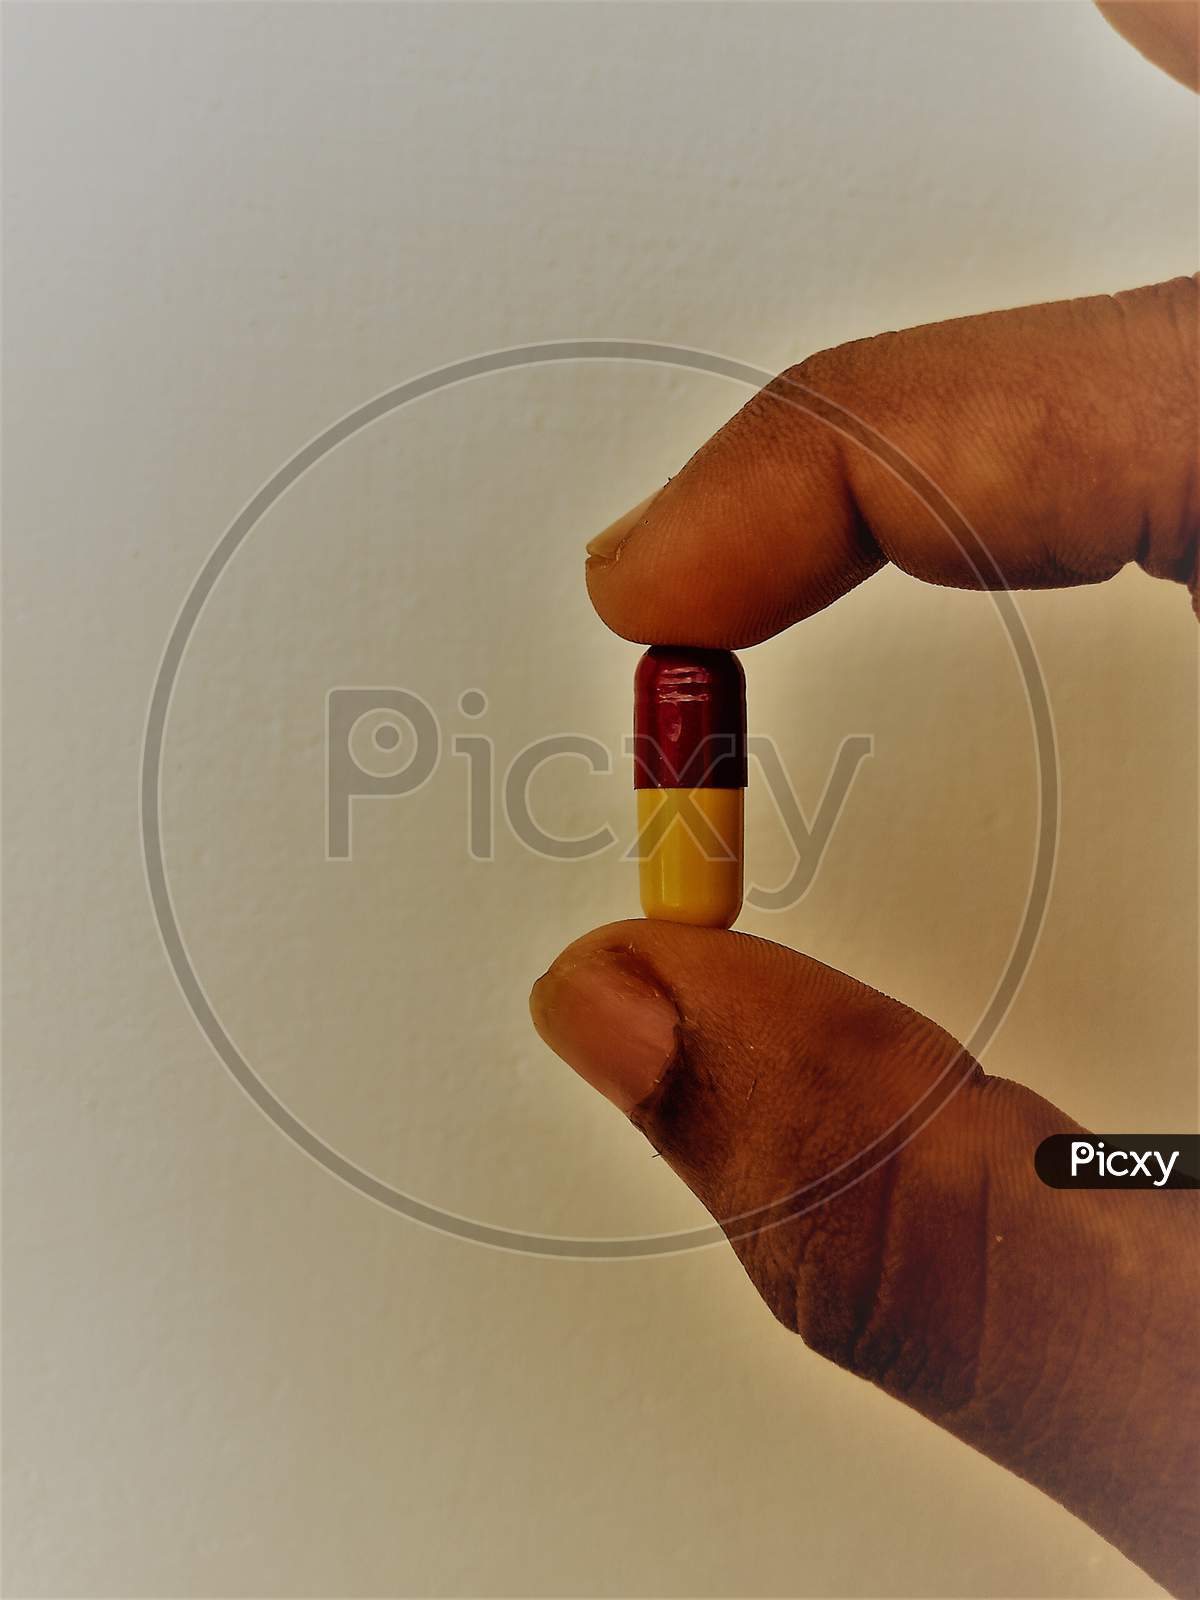 A tablet is been hold using thumb and forefinger in a white background.